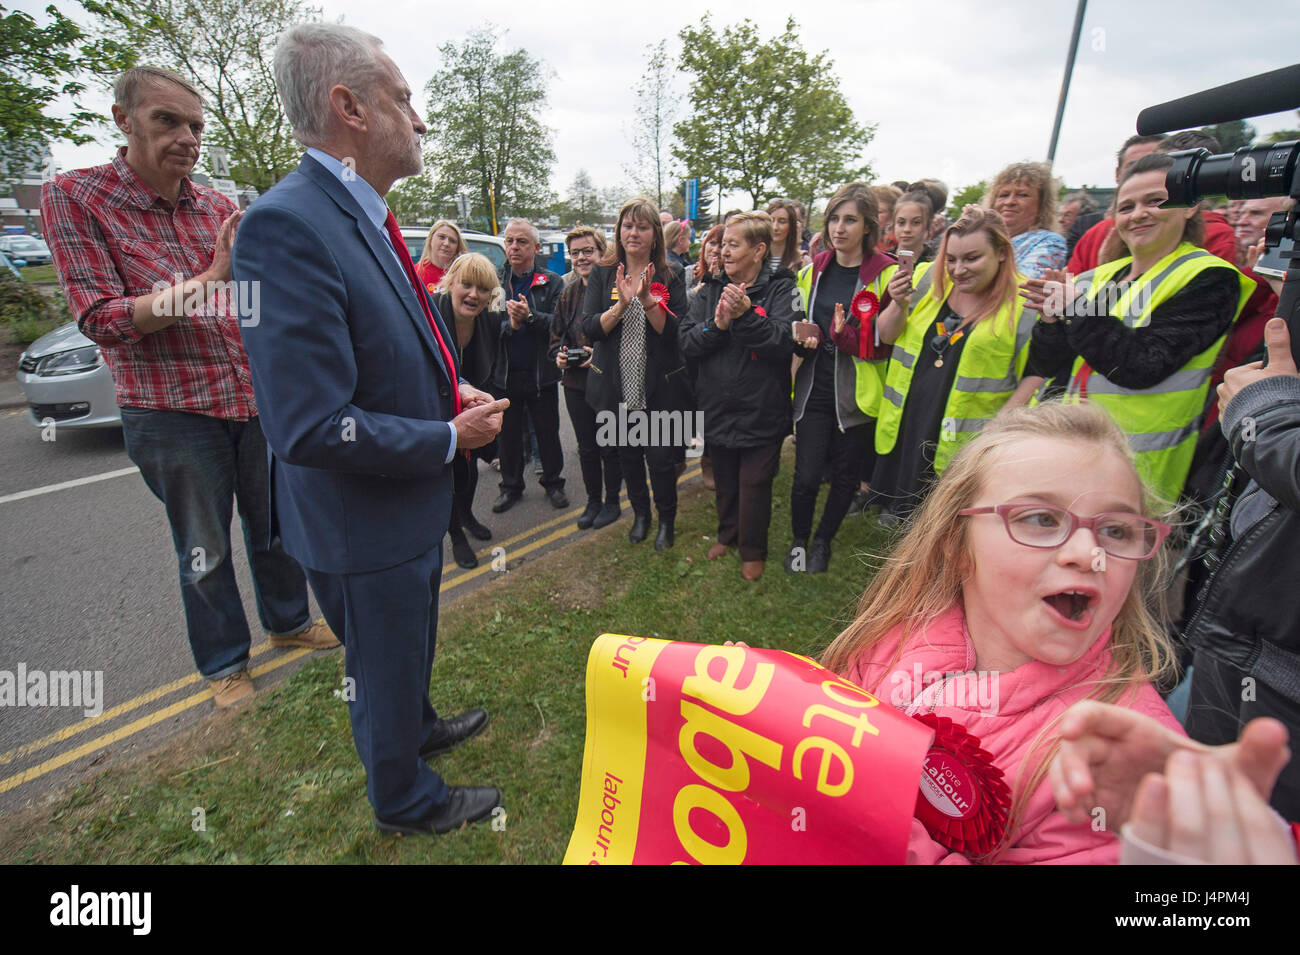 A young supporter reacts as Labour leader Jeremy Corbyn visits the James Paget Hospital in Gorleston-on-Sea, Great Yarmouth, during the campaign trail. Stock Photo